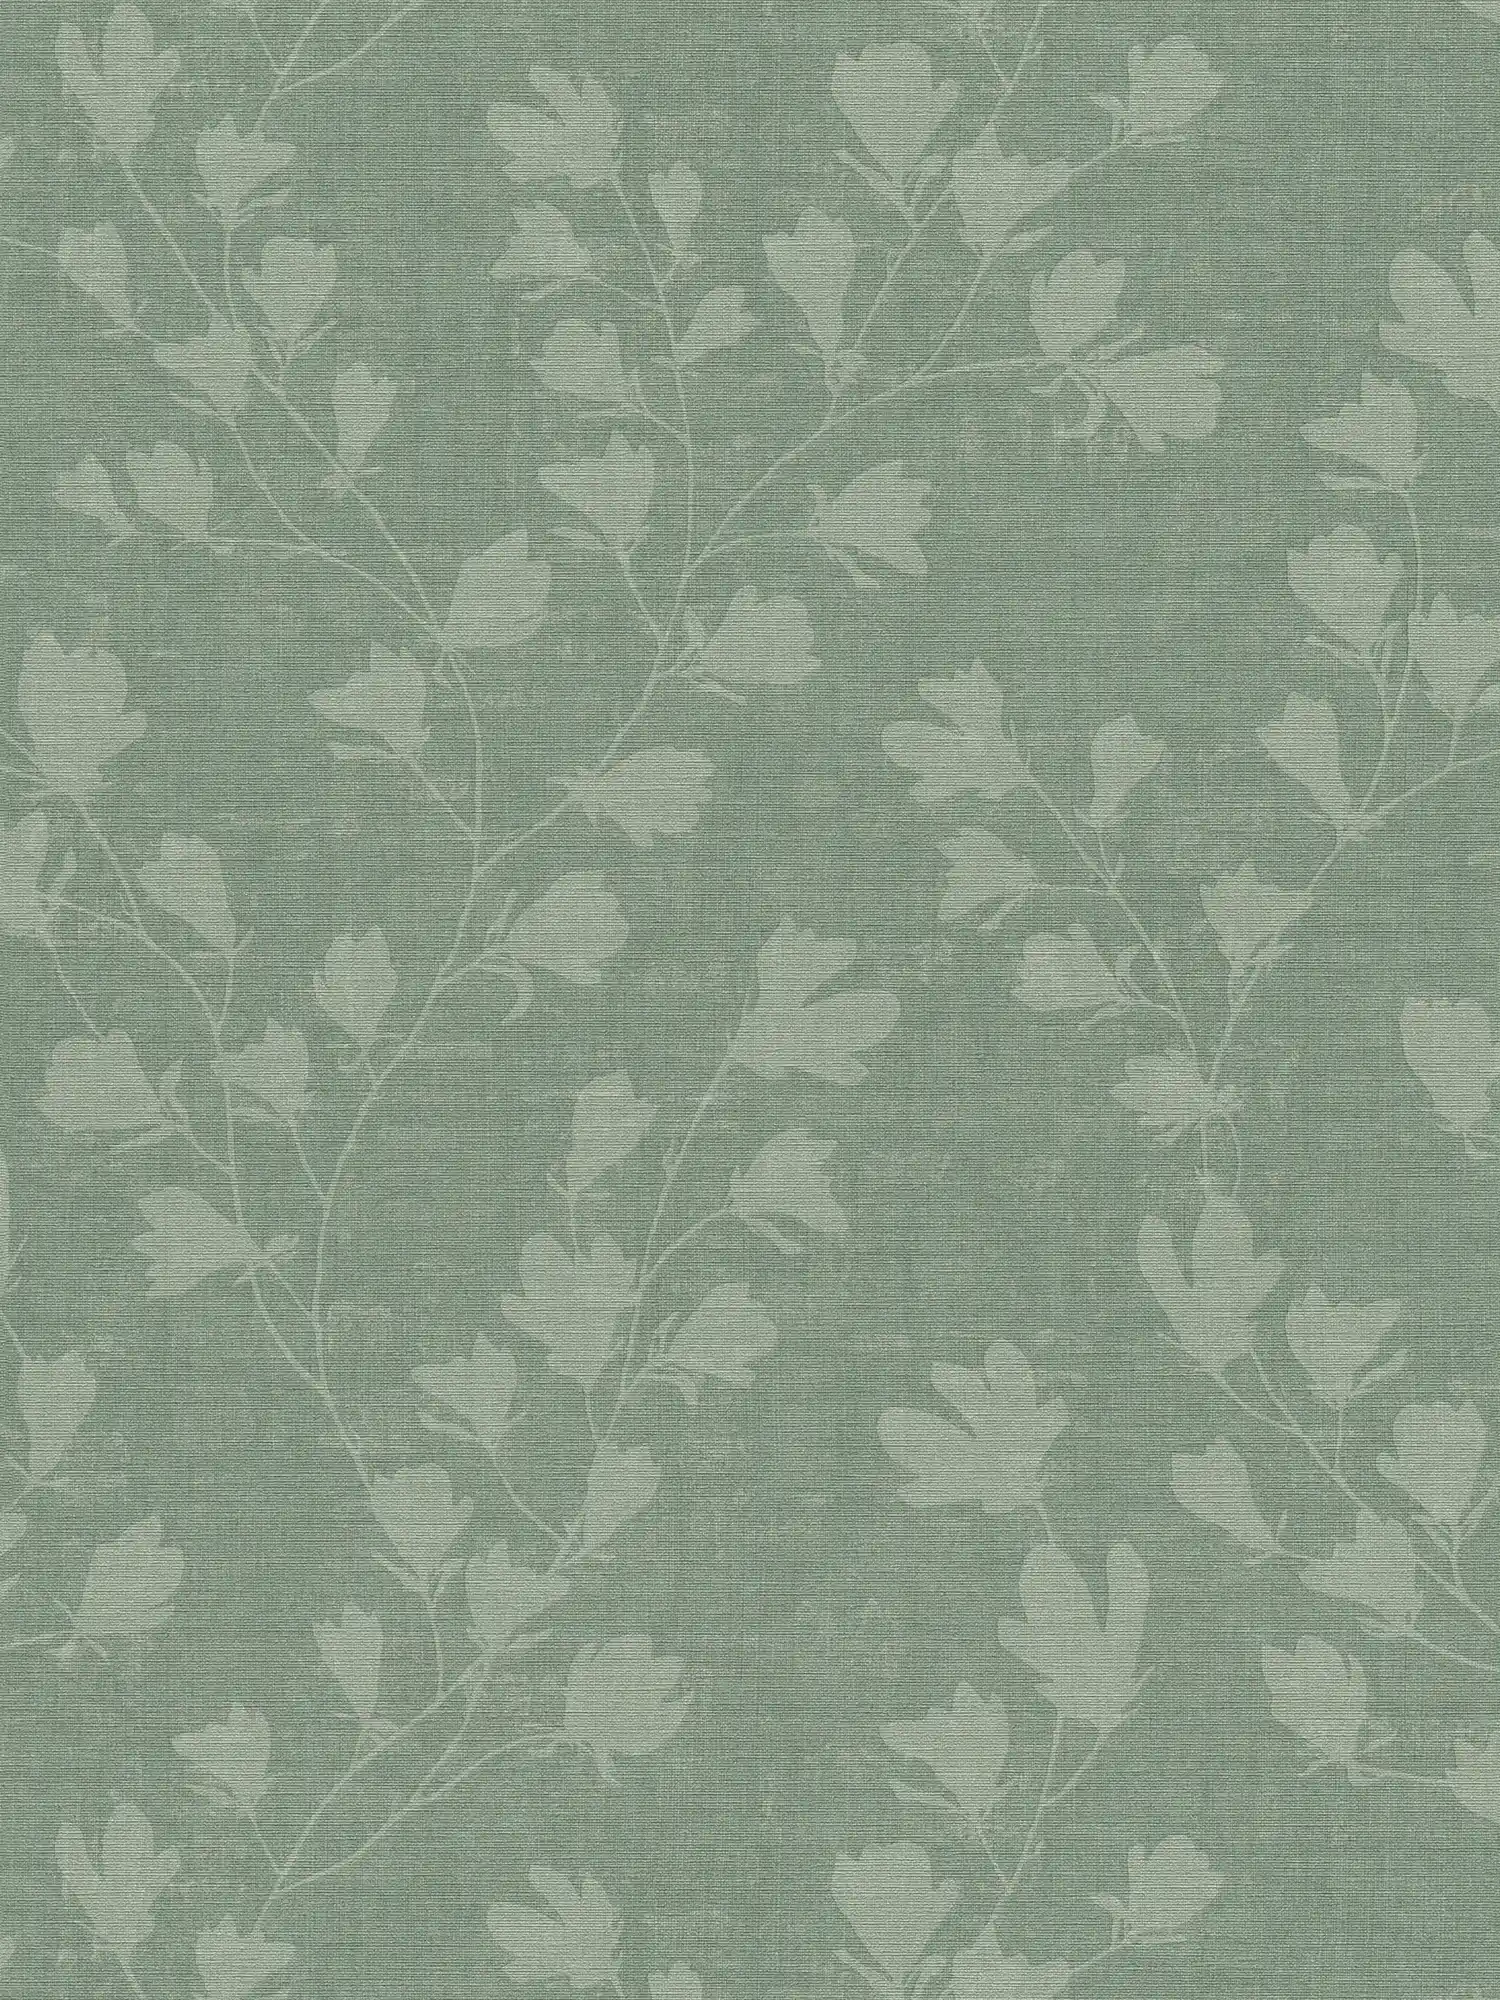         Nature wallpaper with leaf motif - green
    